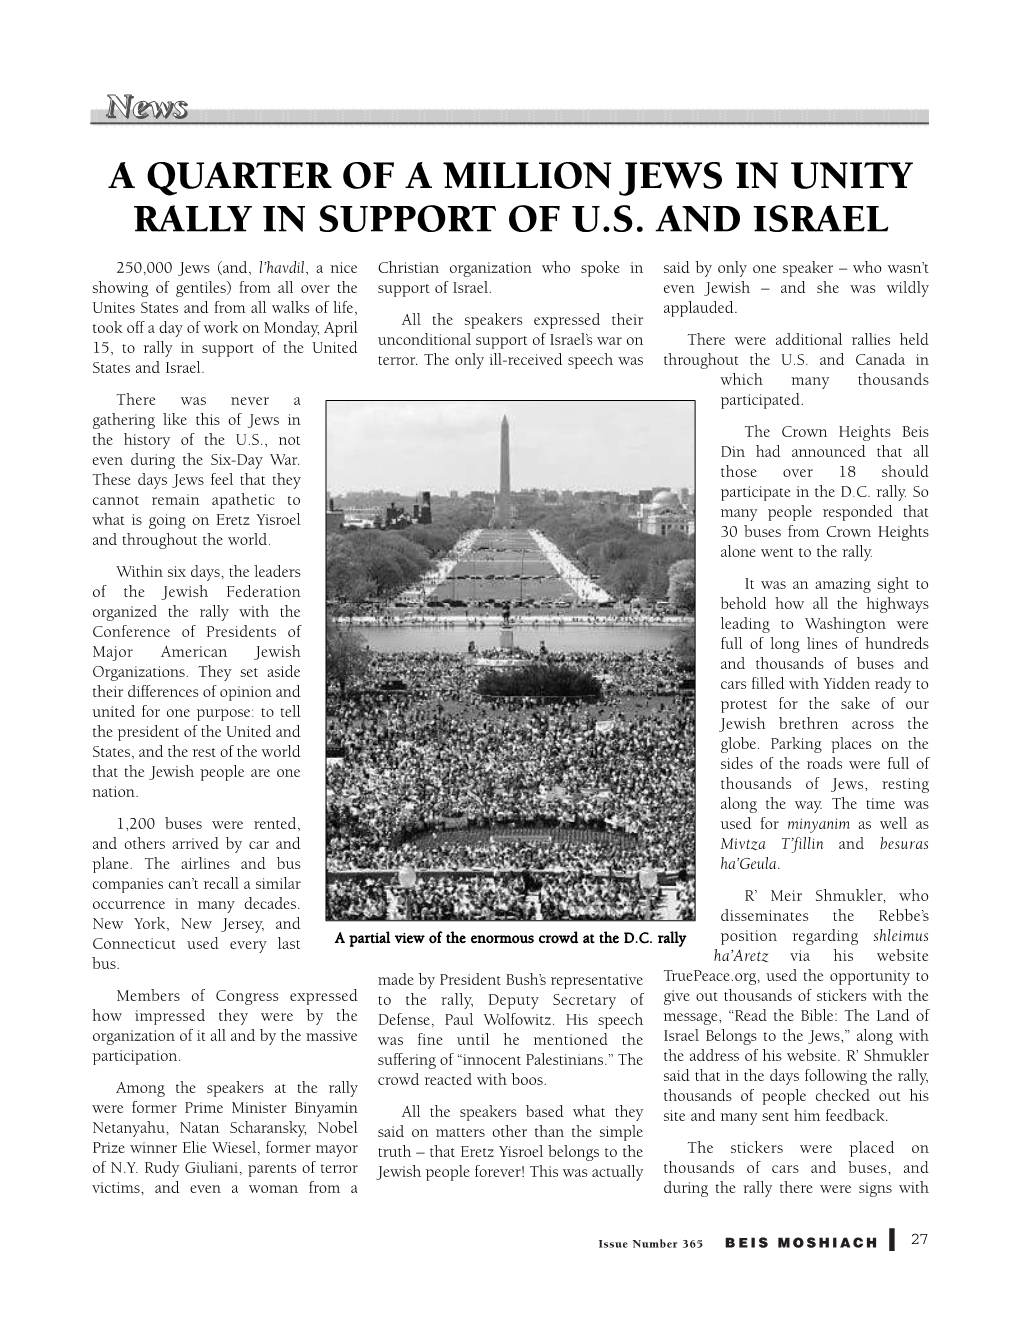 A Quarter of a Million Jews in Unity Rally in Support of U.S